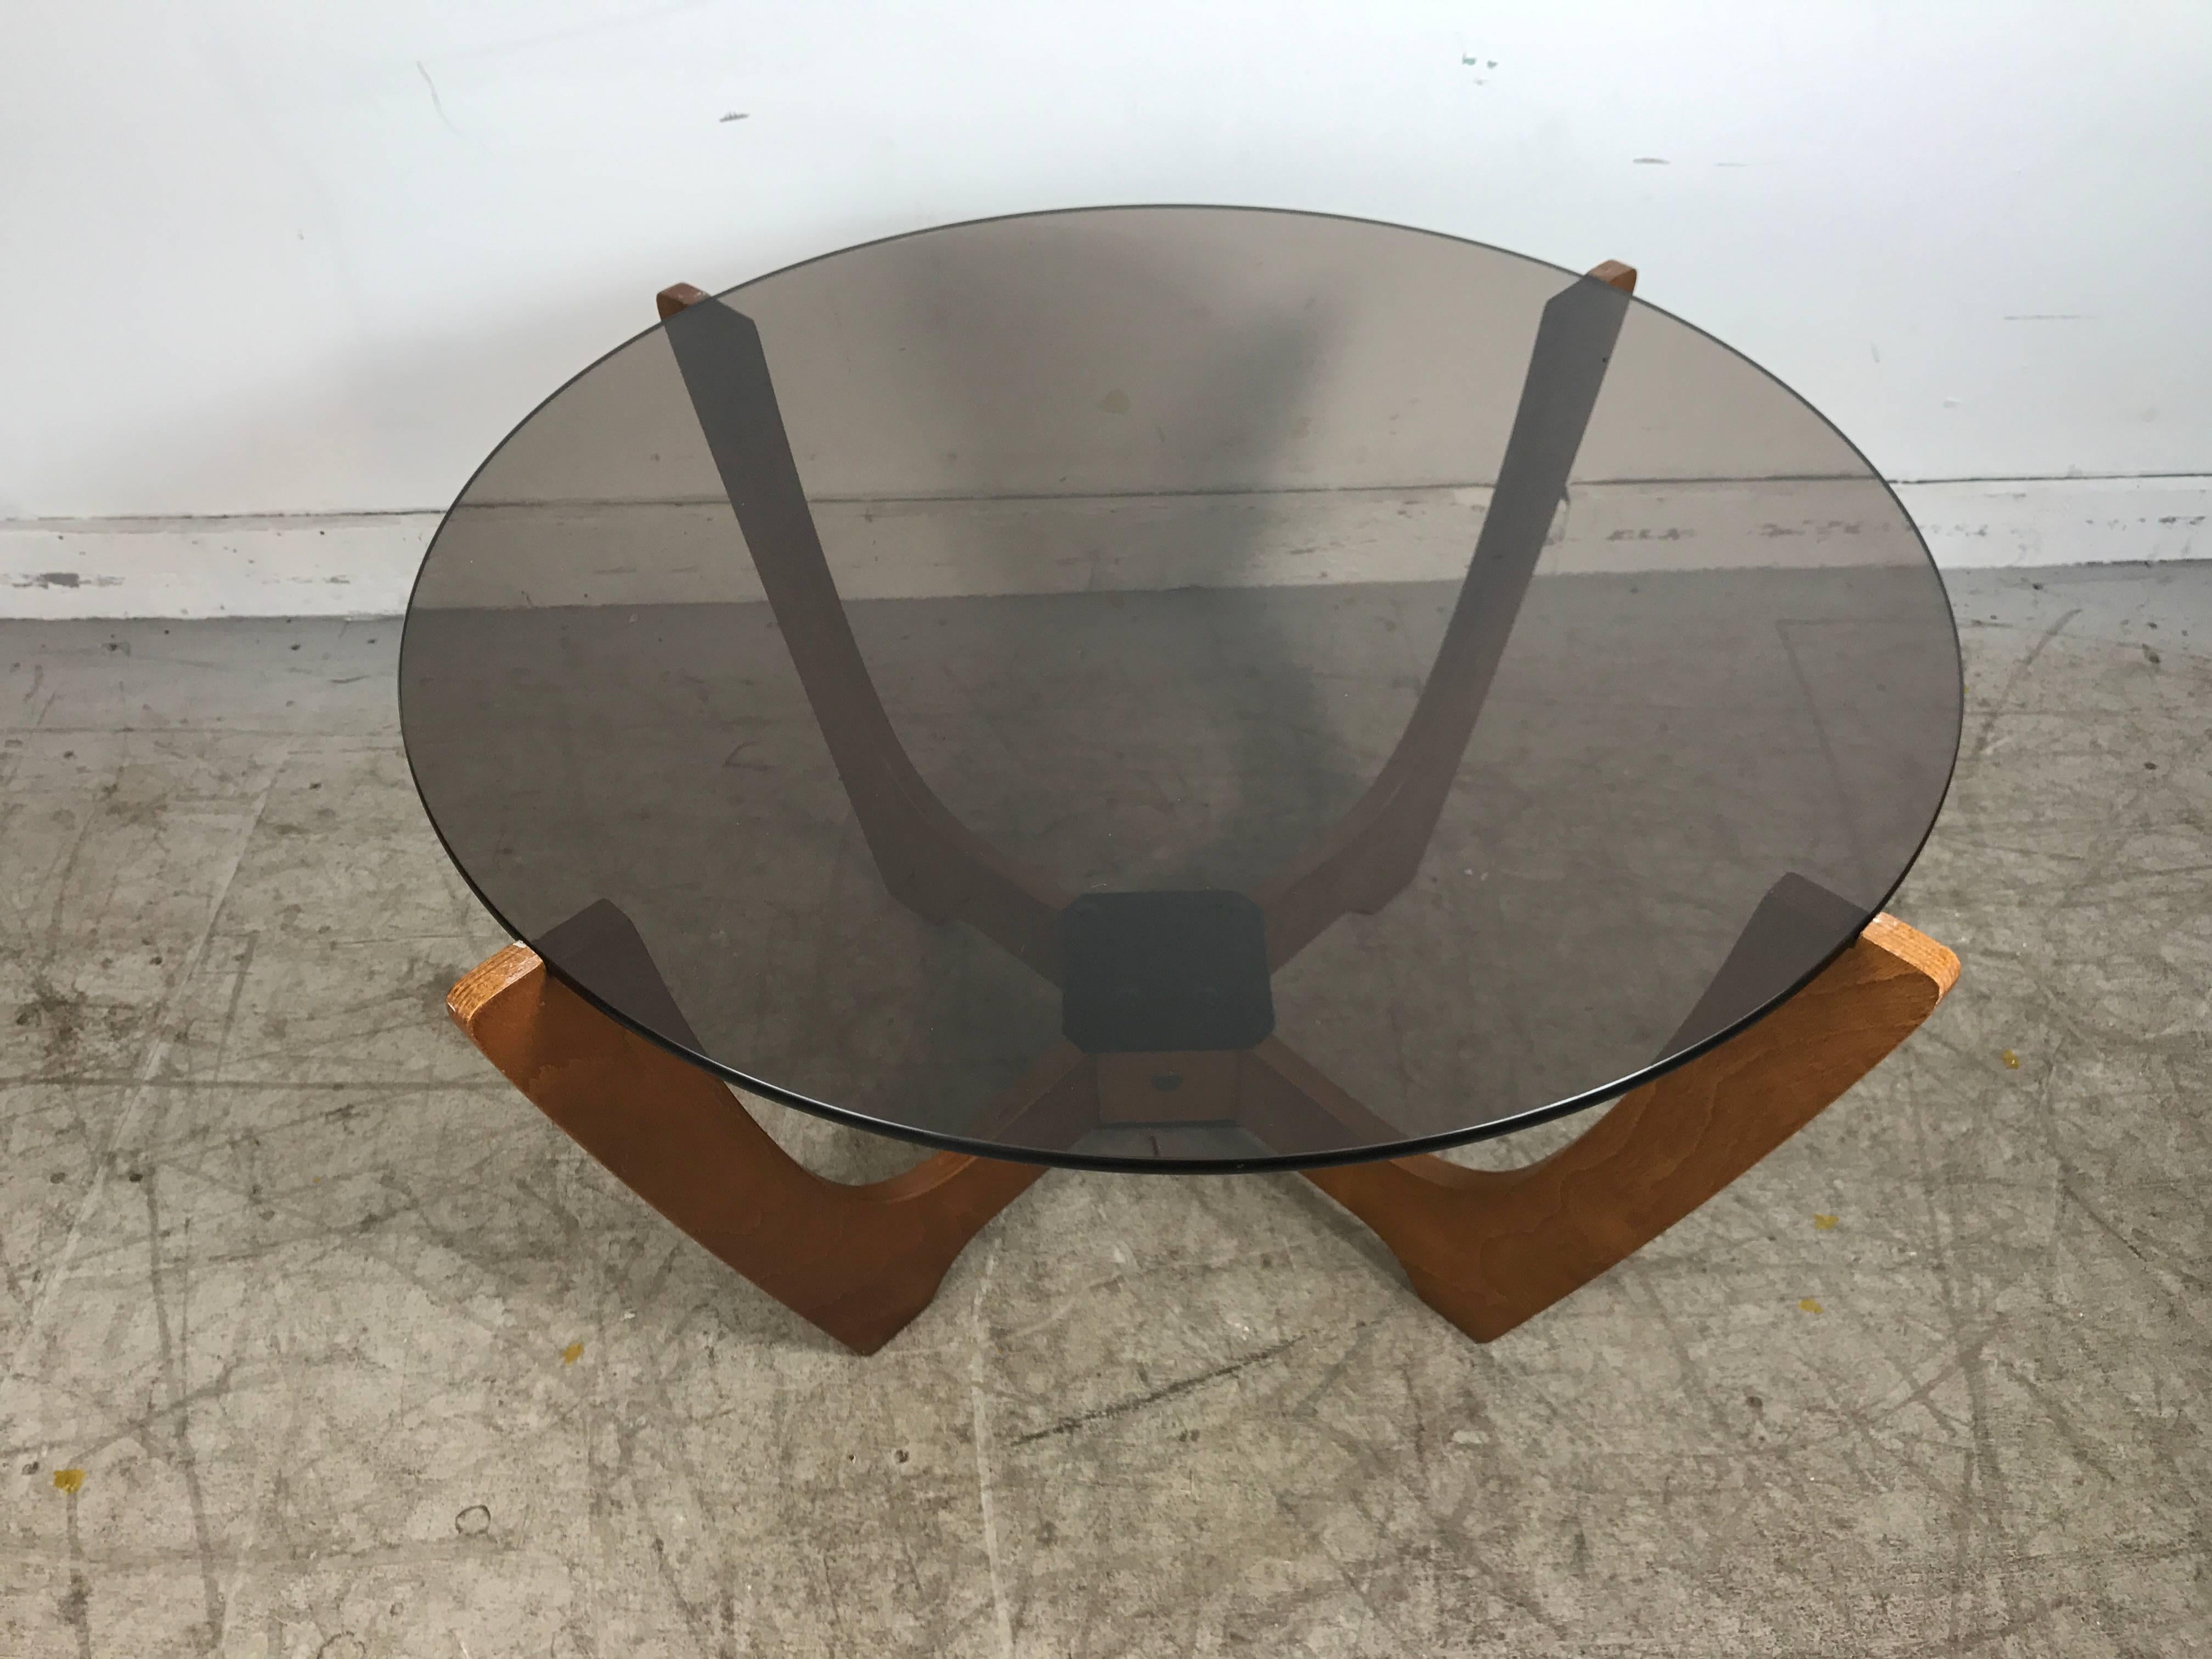 Classic Scandinavian “Luna” cocktail table by Odd Knutsen, Norway. Early seldom seen cocktail/coffee table designed by Odd Knutsen, wonderful original condition, original smoked glass top. See other listing for matching pair of Luna lounge chairs.